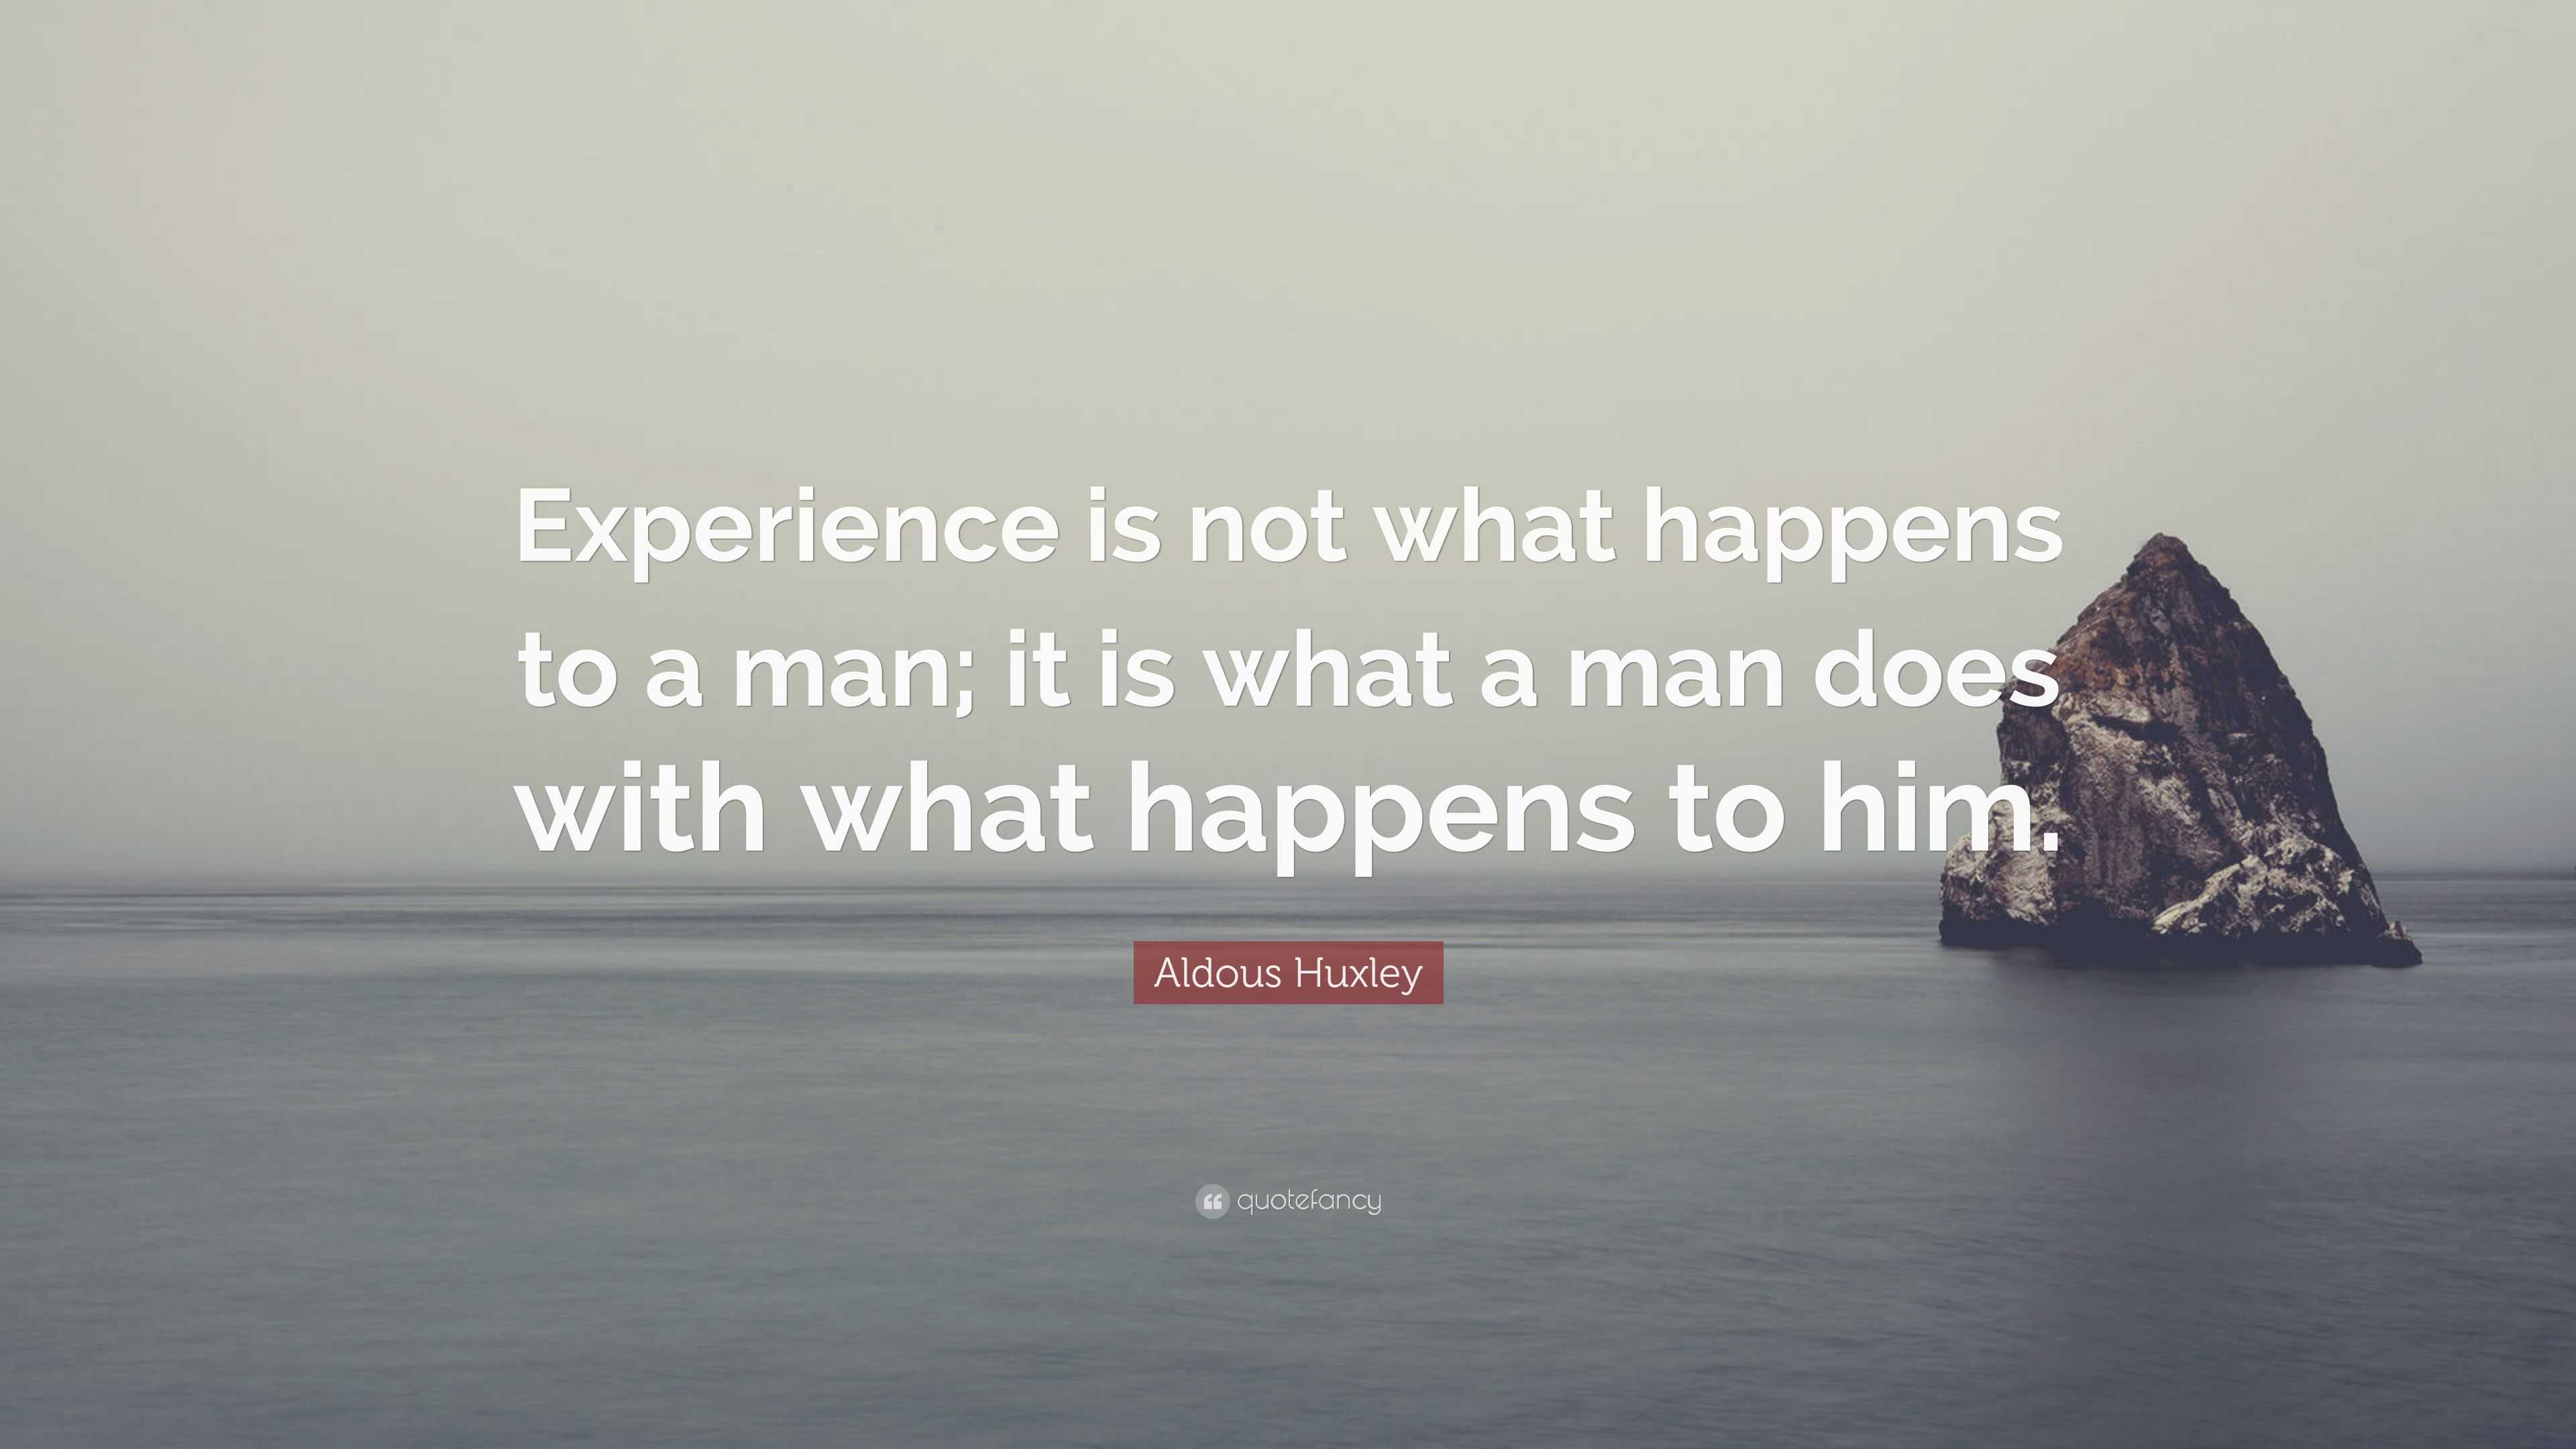 aldous huxley quote experience is not what happens to you